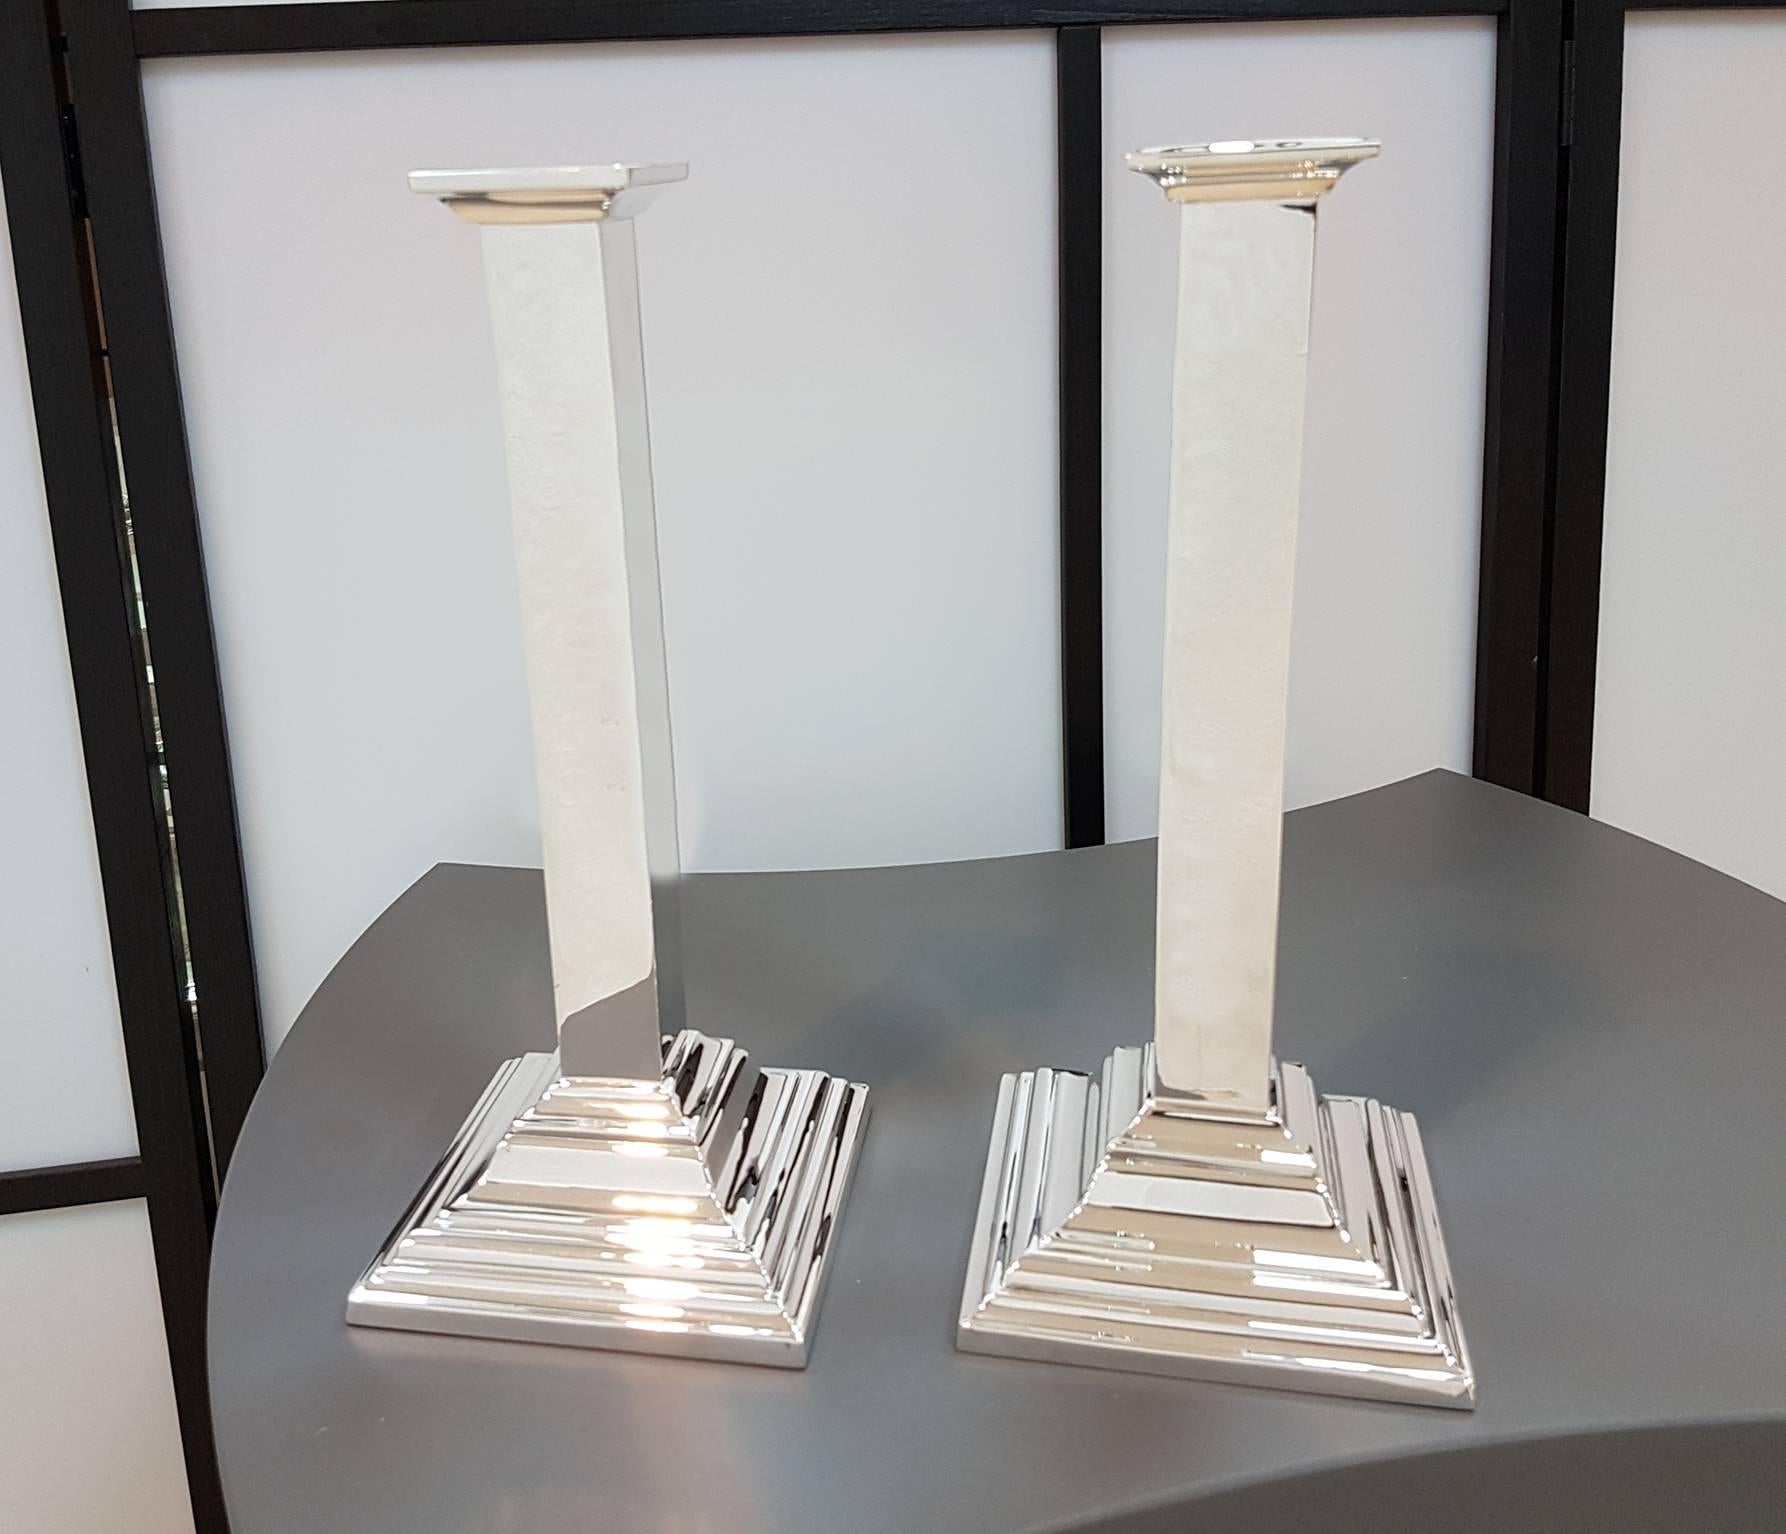 Pair of candlesticks in sterling silver completely handmade in a modern style. The base is square with steps while the stem, also square, is completely smooth with the upper part that widens slightly to accommodate the candle holder.
Minimalist